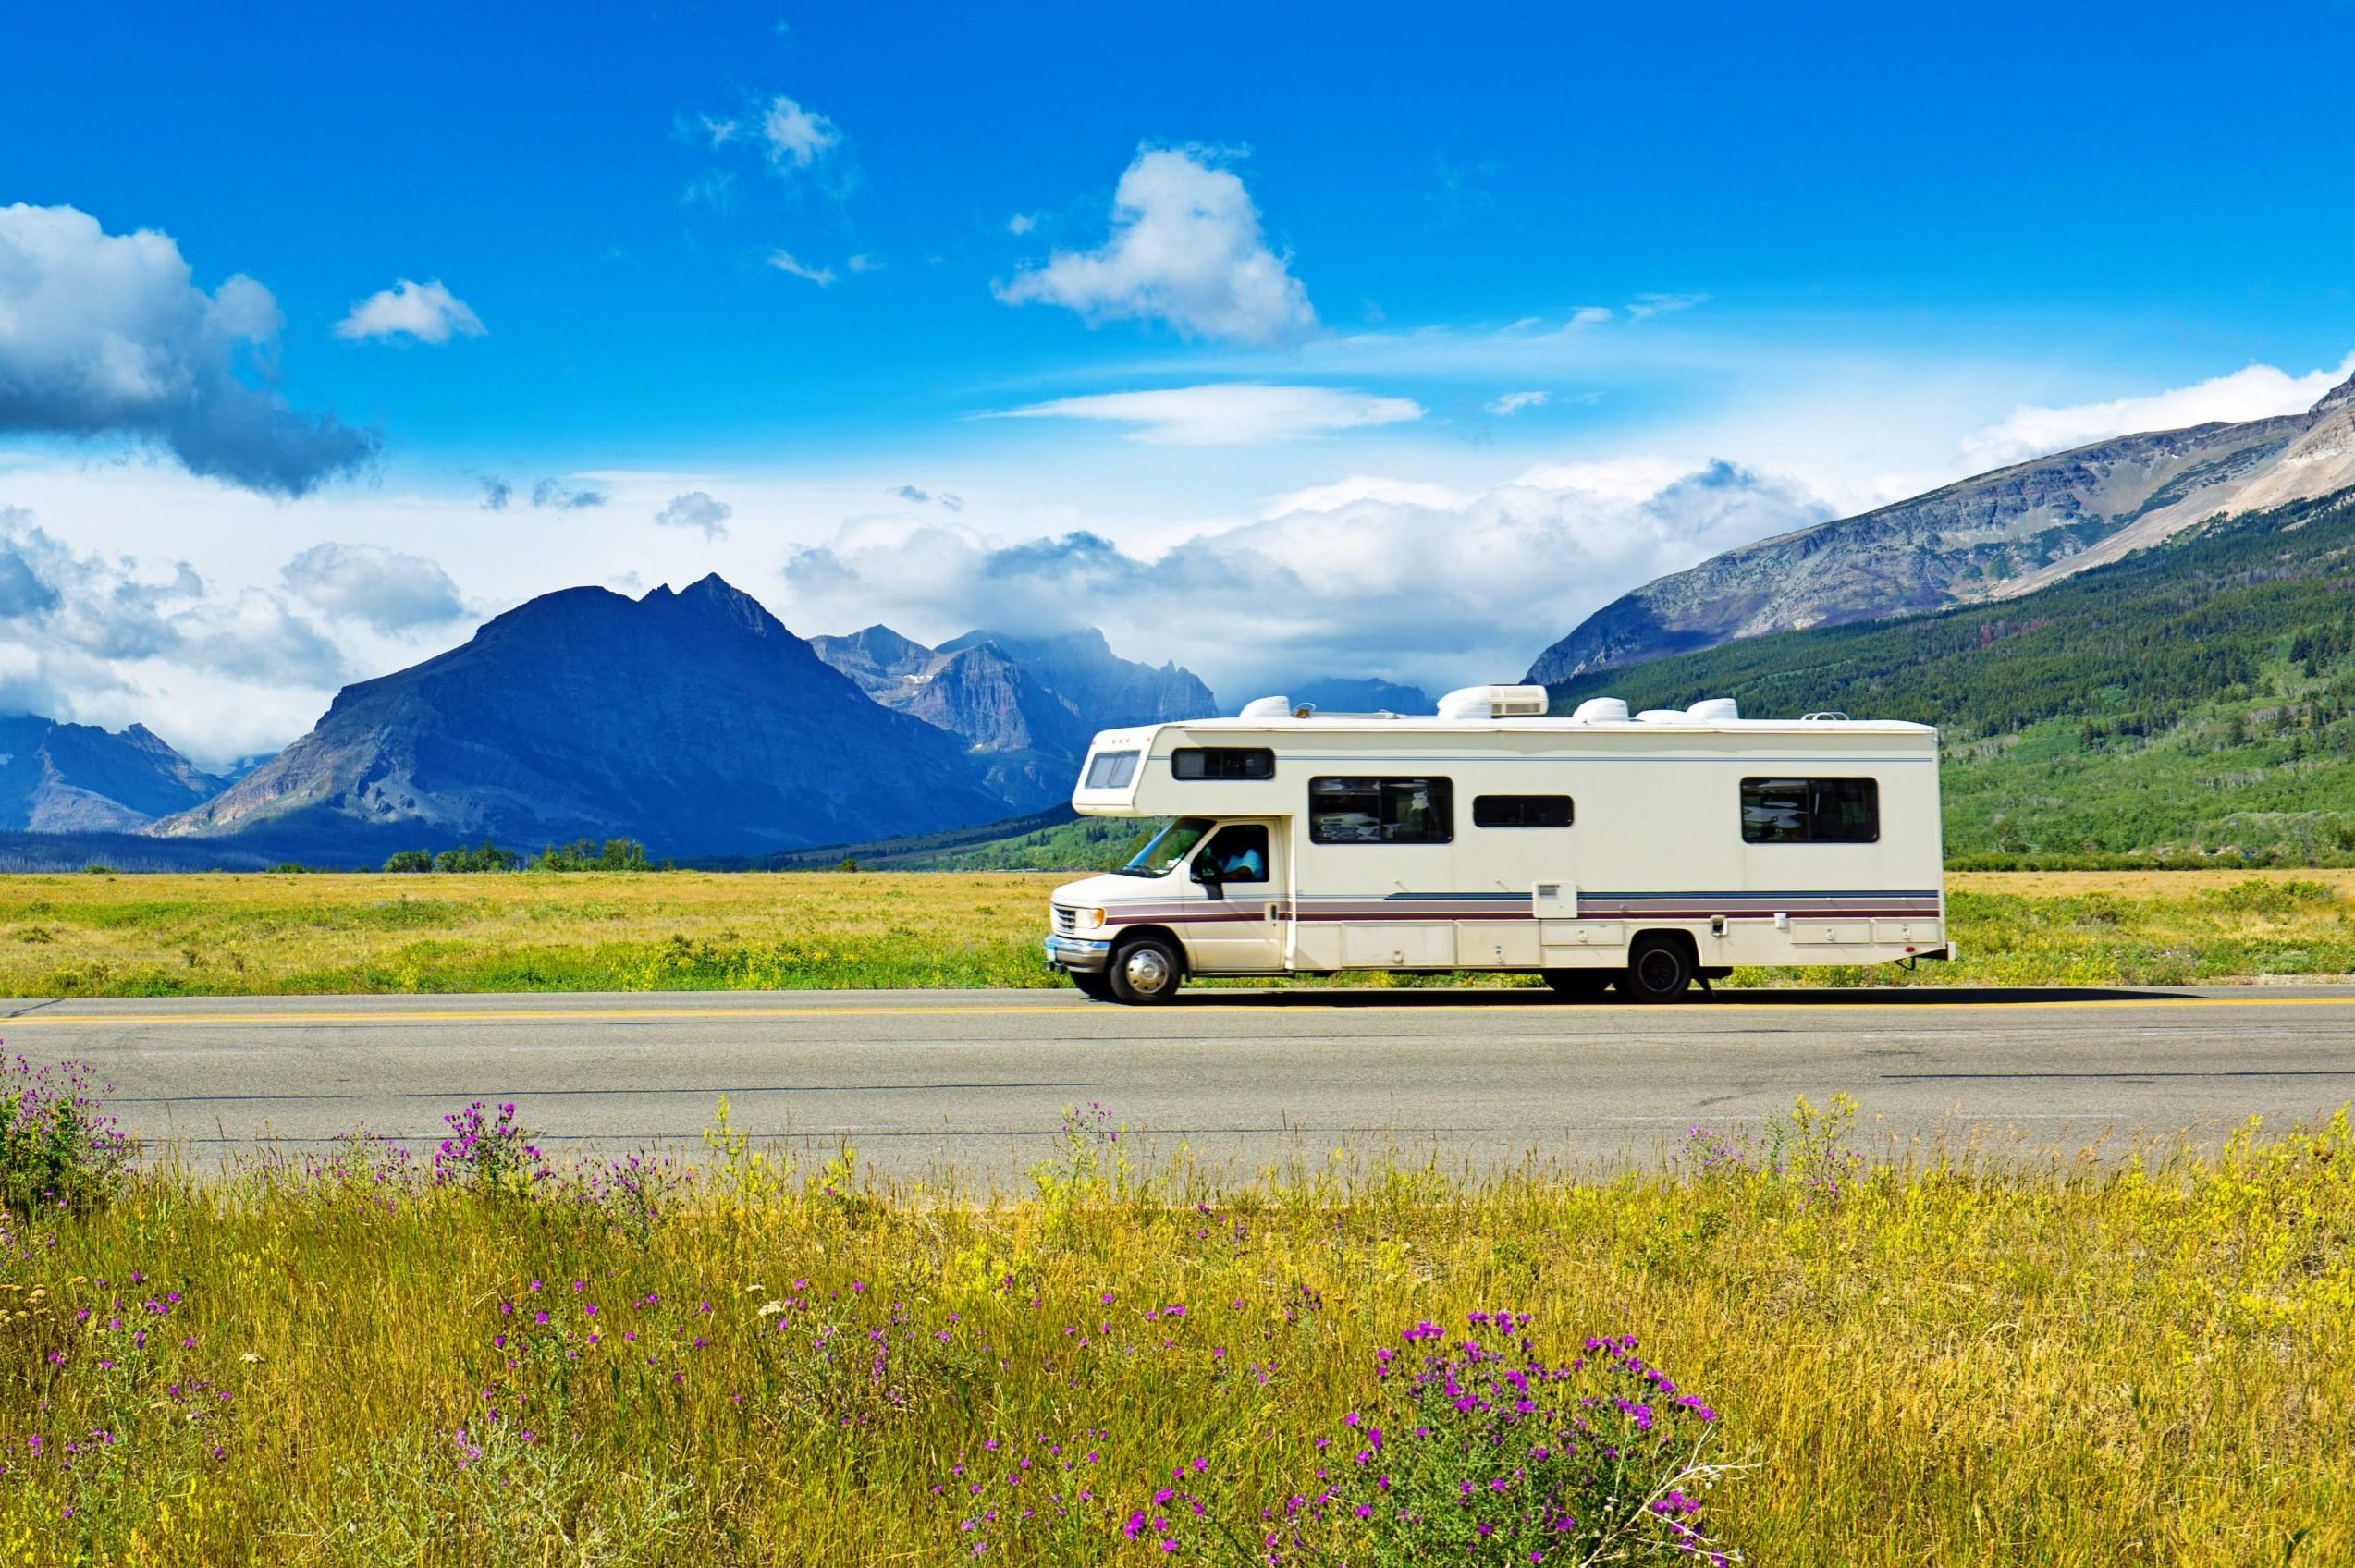 rv on the road among a beautiful landscape with mountains in the background